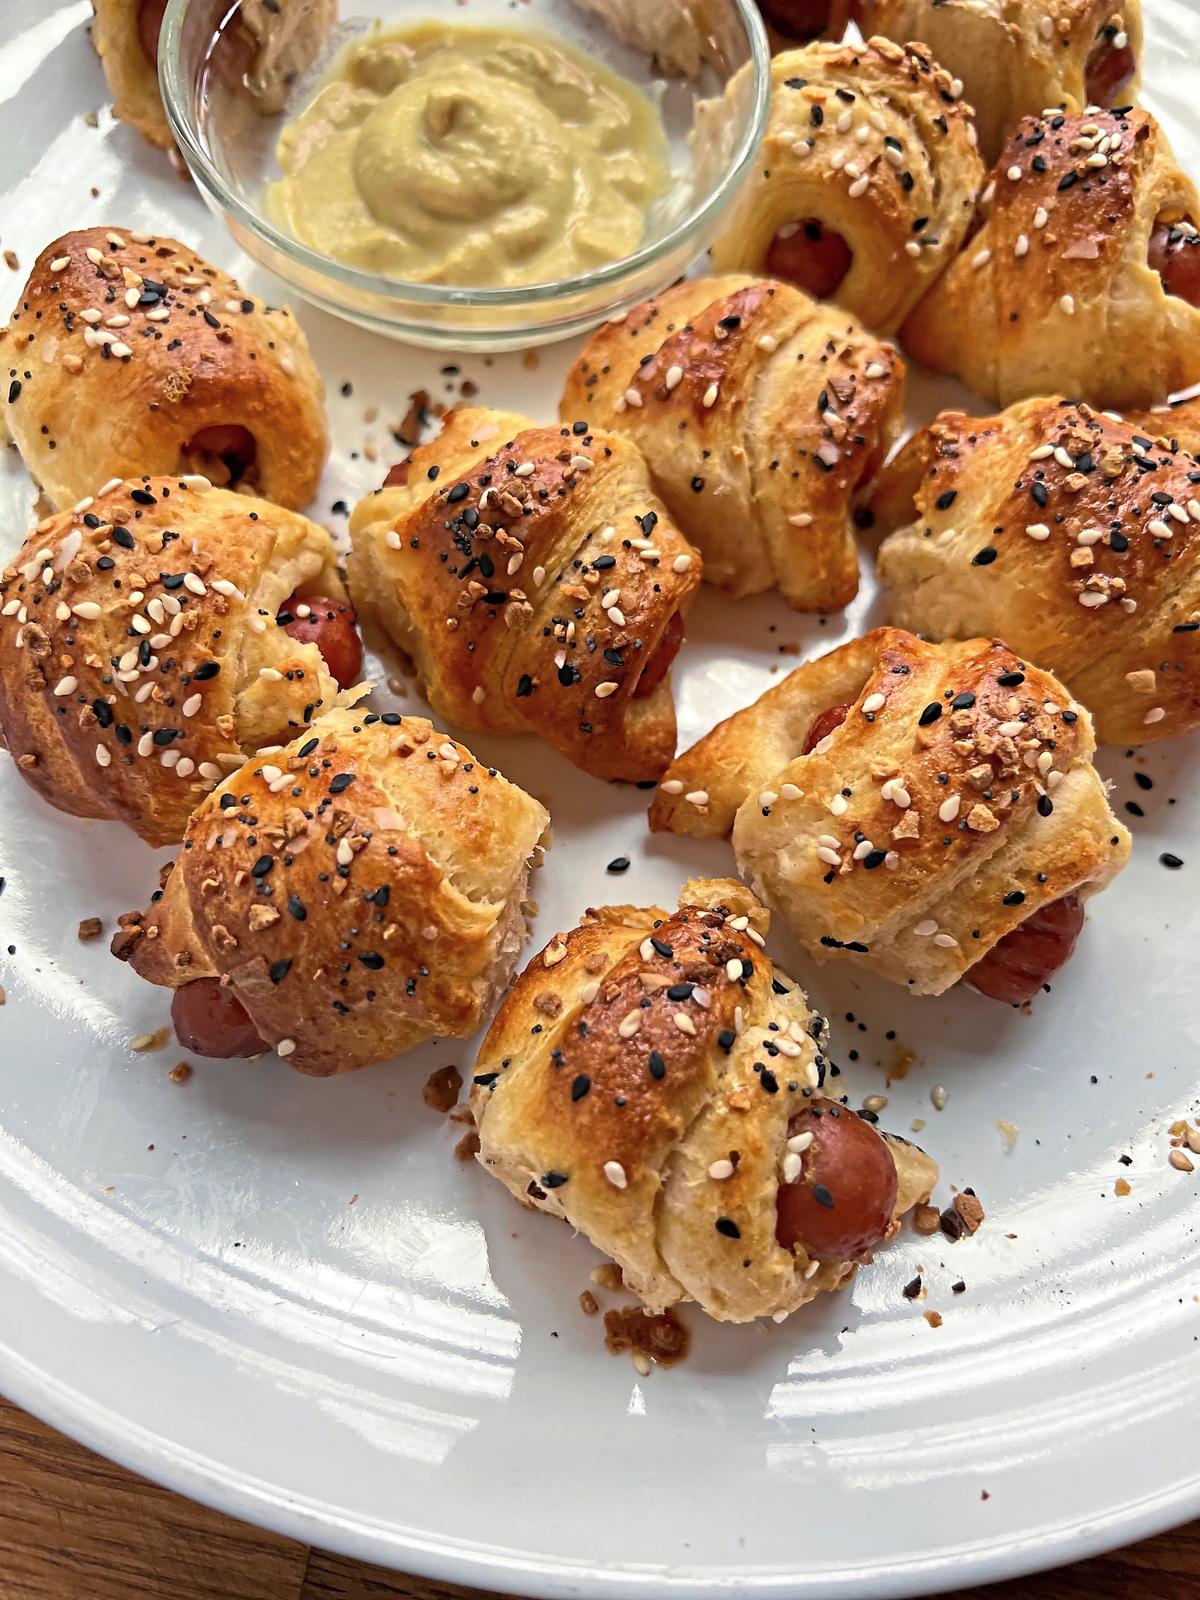 Pigs in a blanket are easy for tiny fingers to roll up, and even more fun to eat. (Gretchen McKay/Pittsburgh Post-Gazette/TNS)